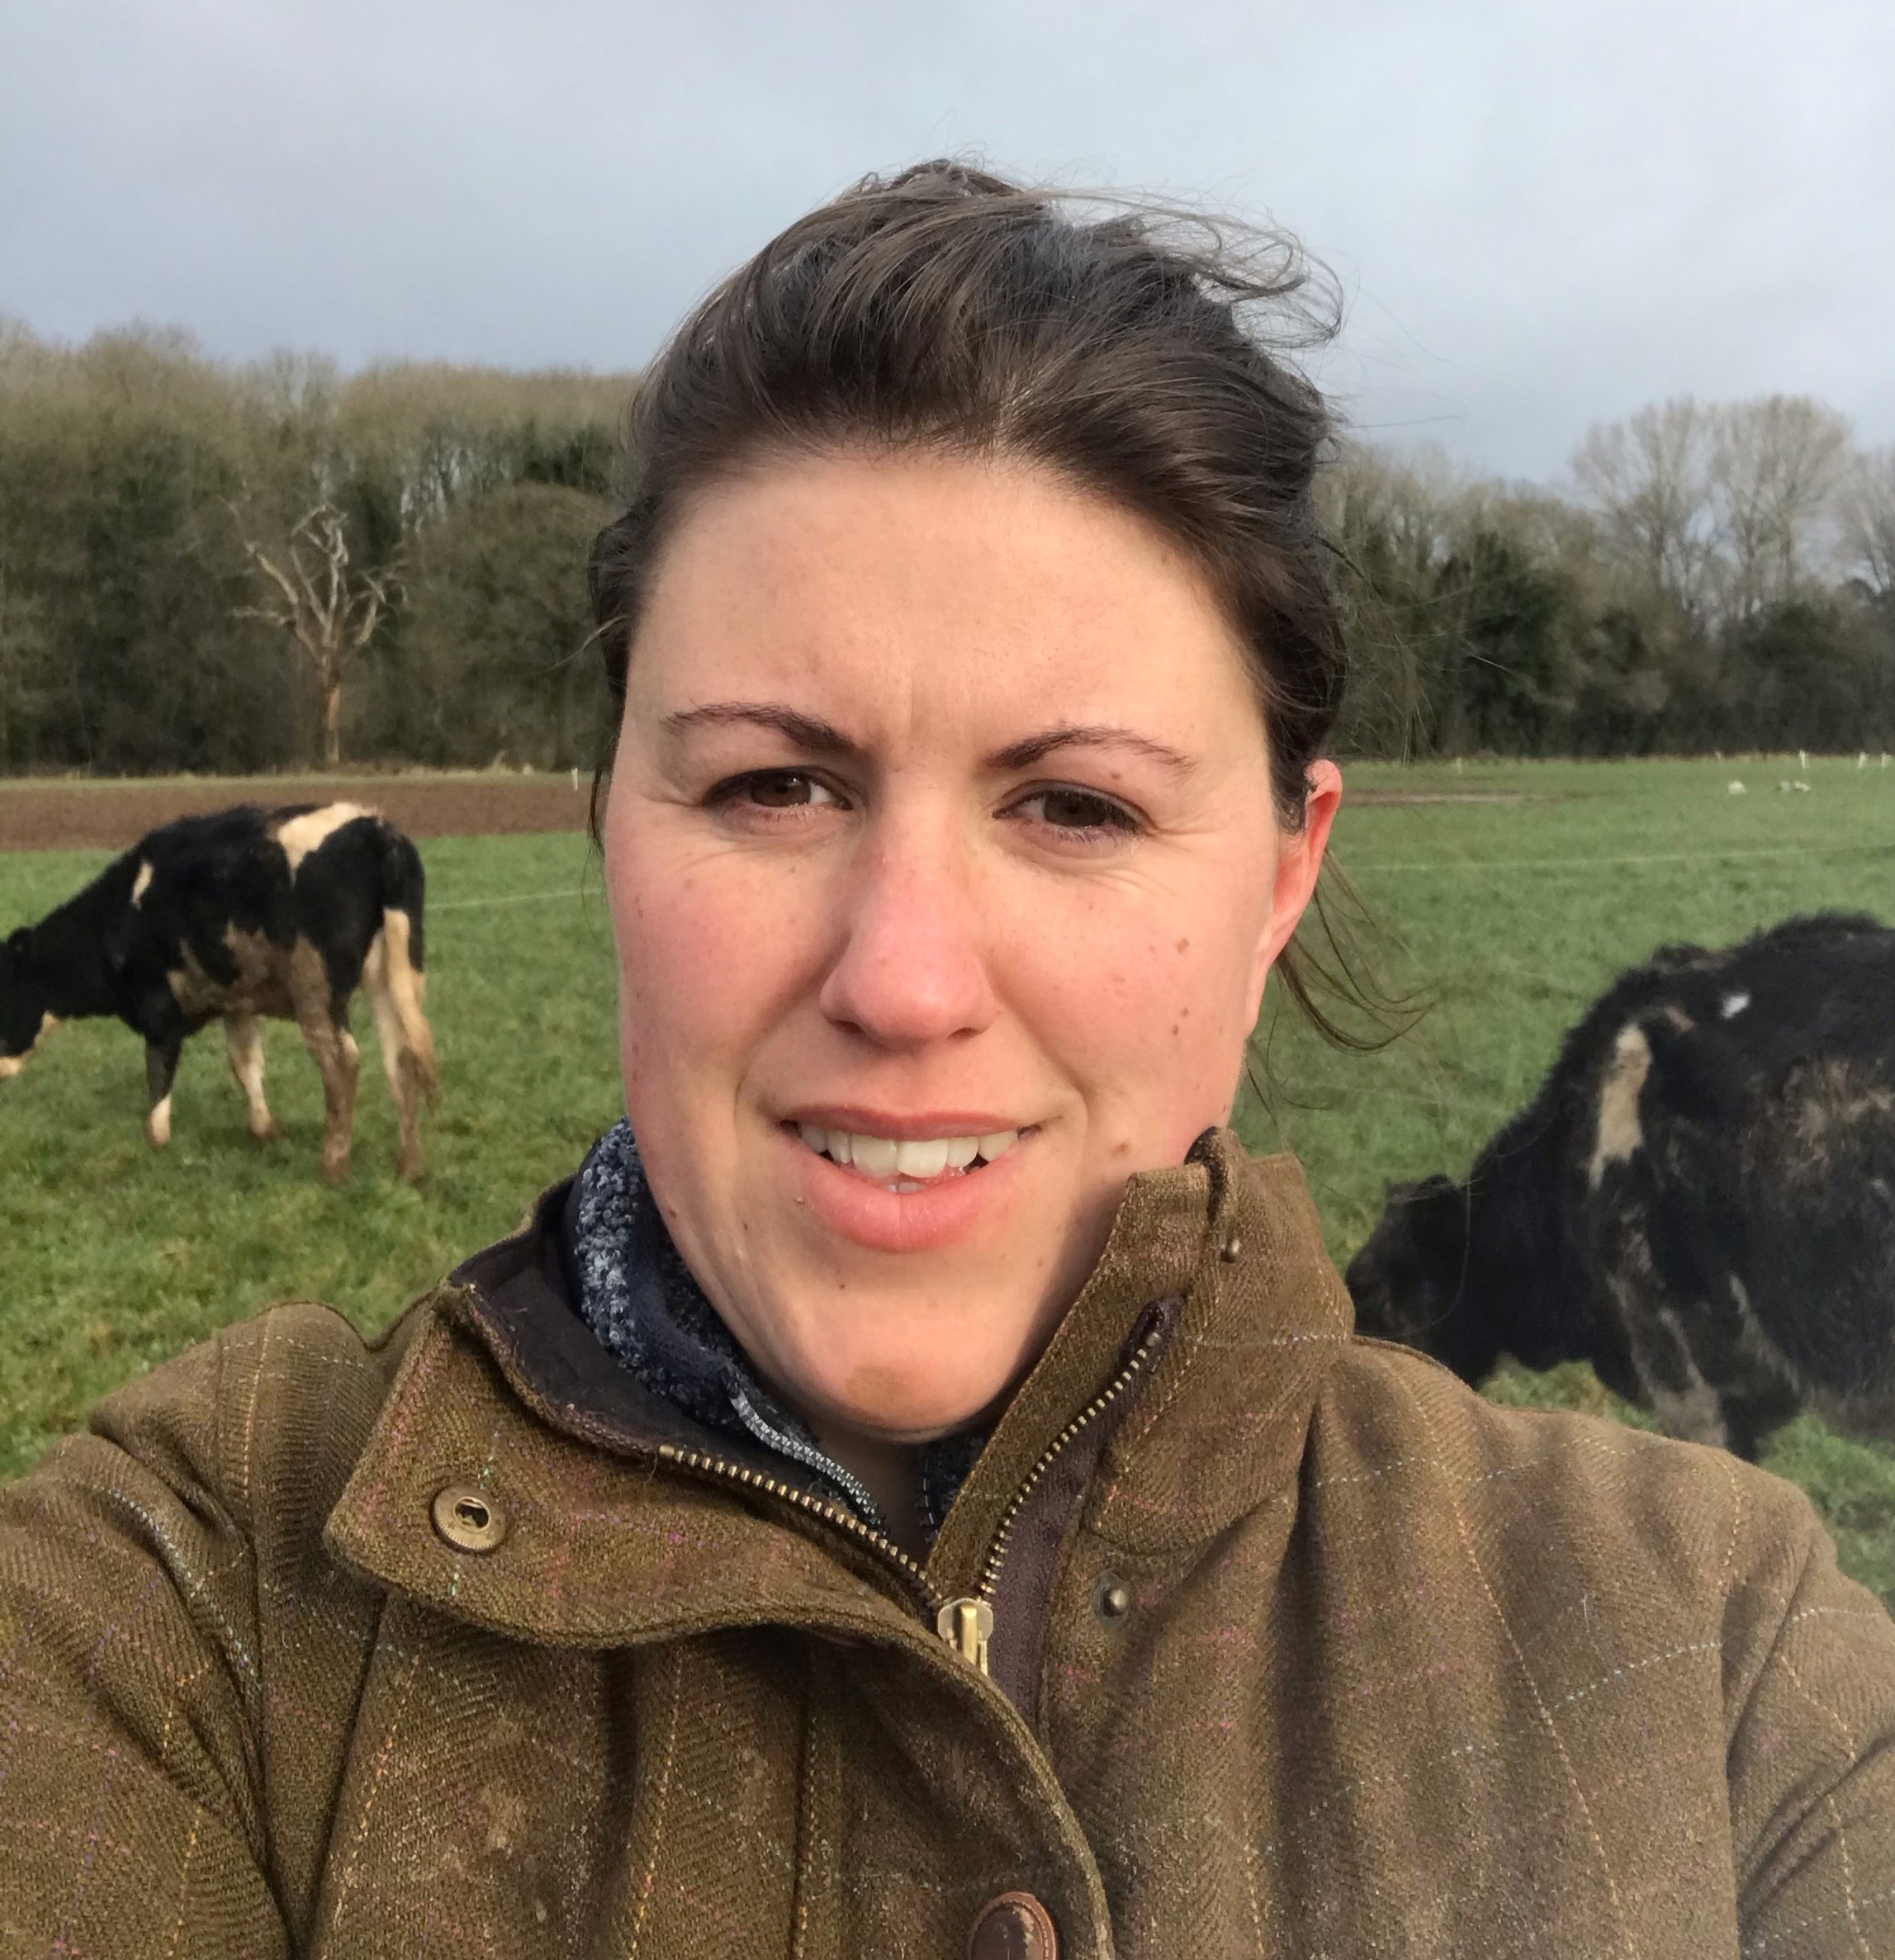 Female dairy farmer standing in a fields with two cows in the background